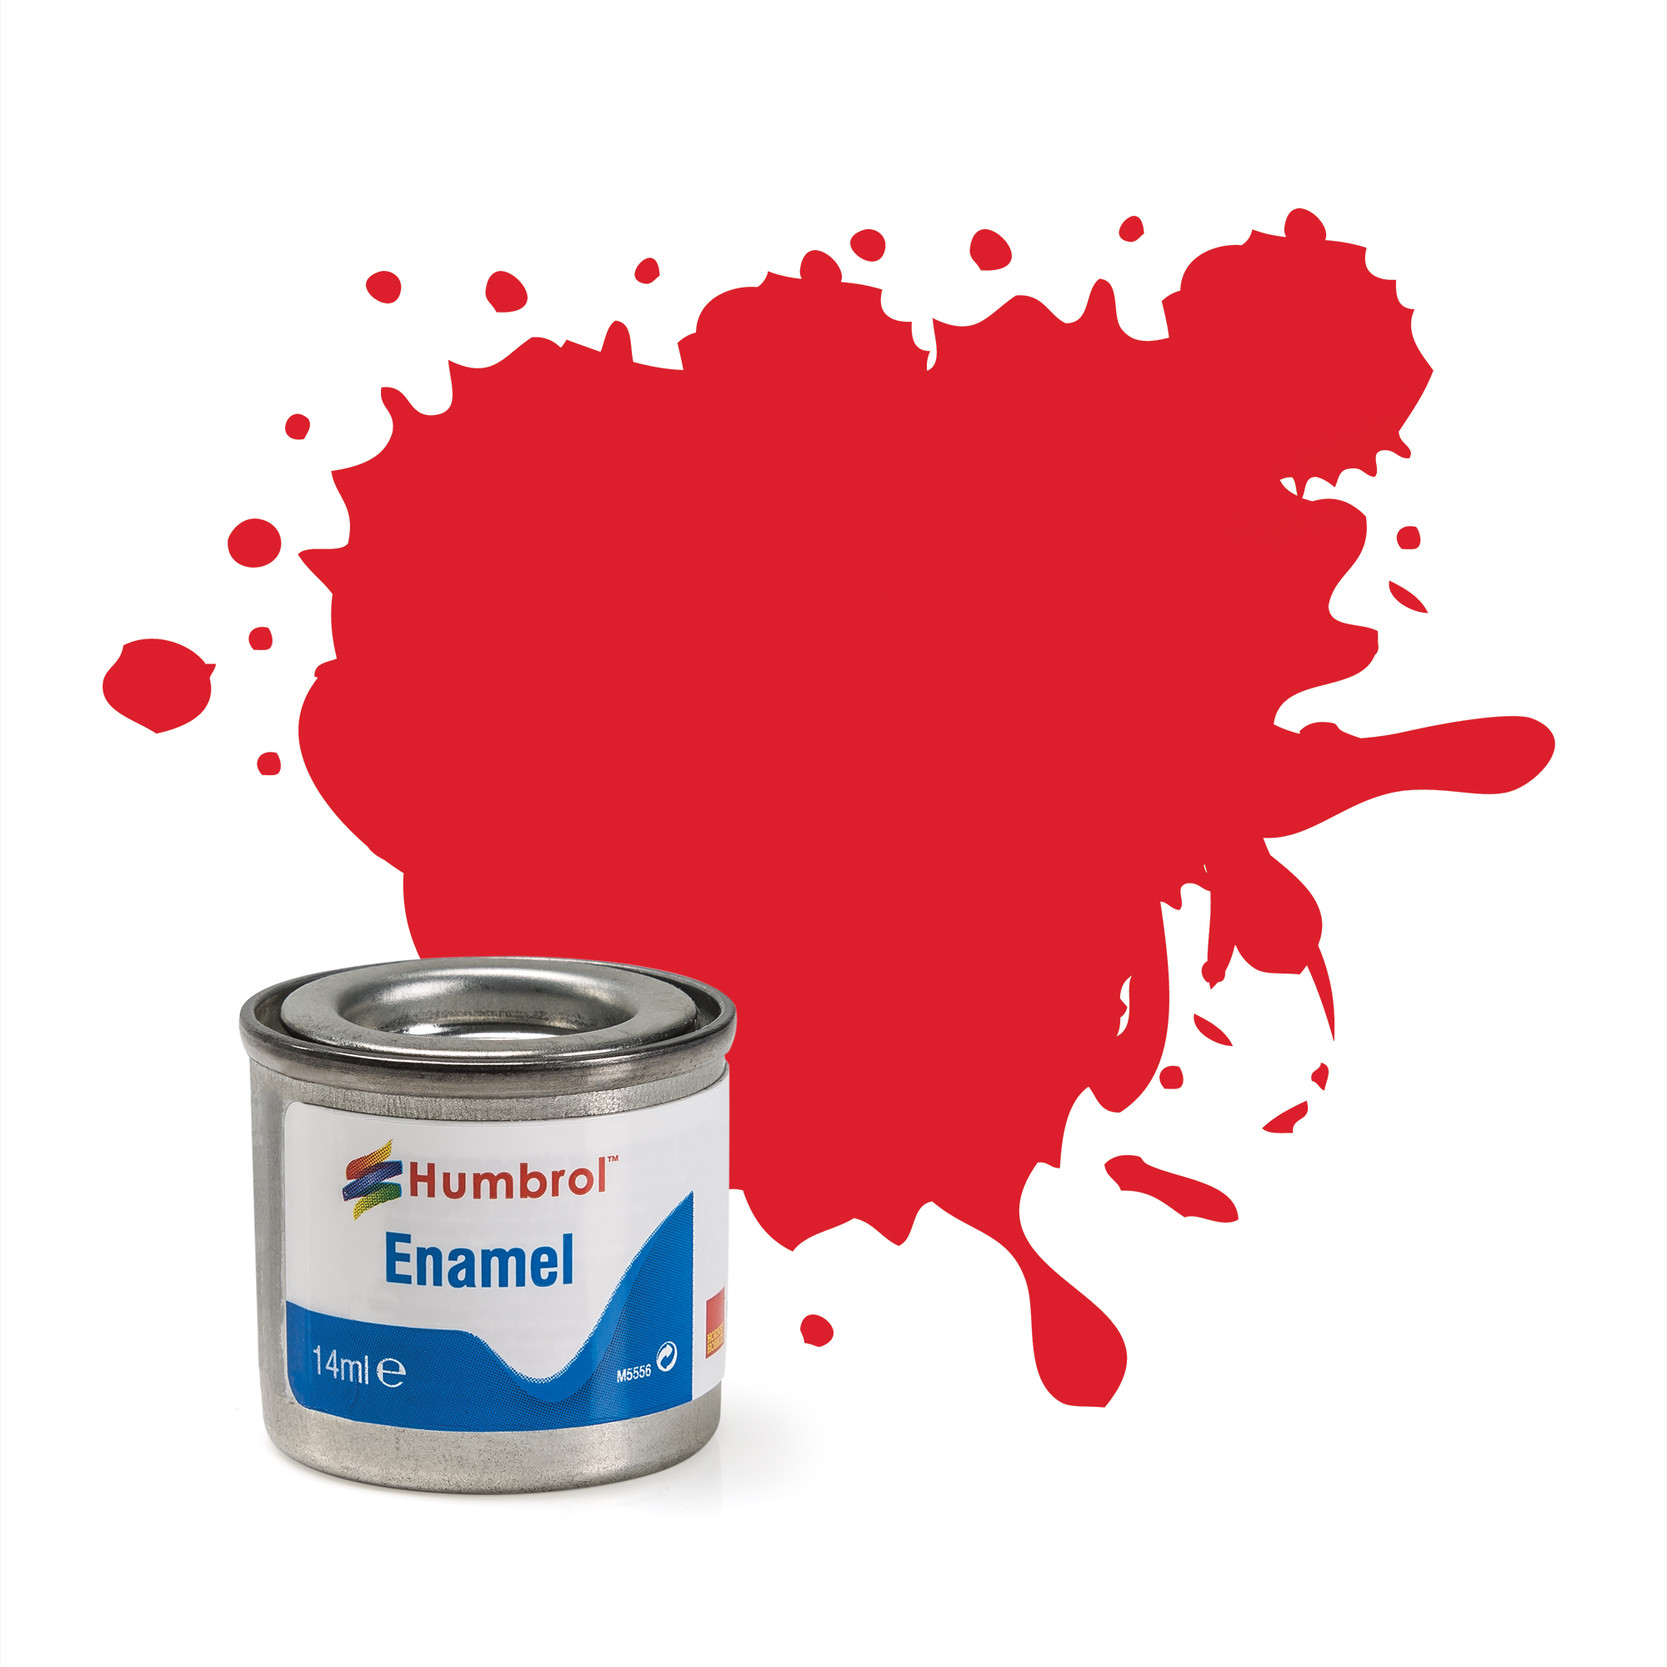 4501019 Enamel Tinlets No 19 Bright Red Gloss